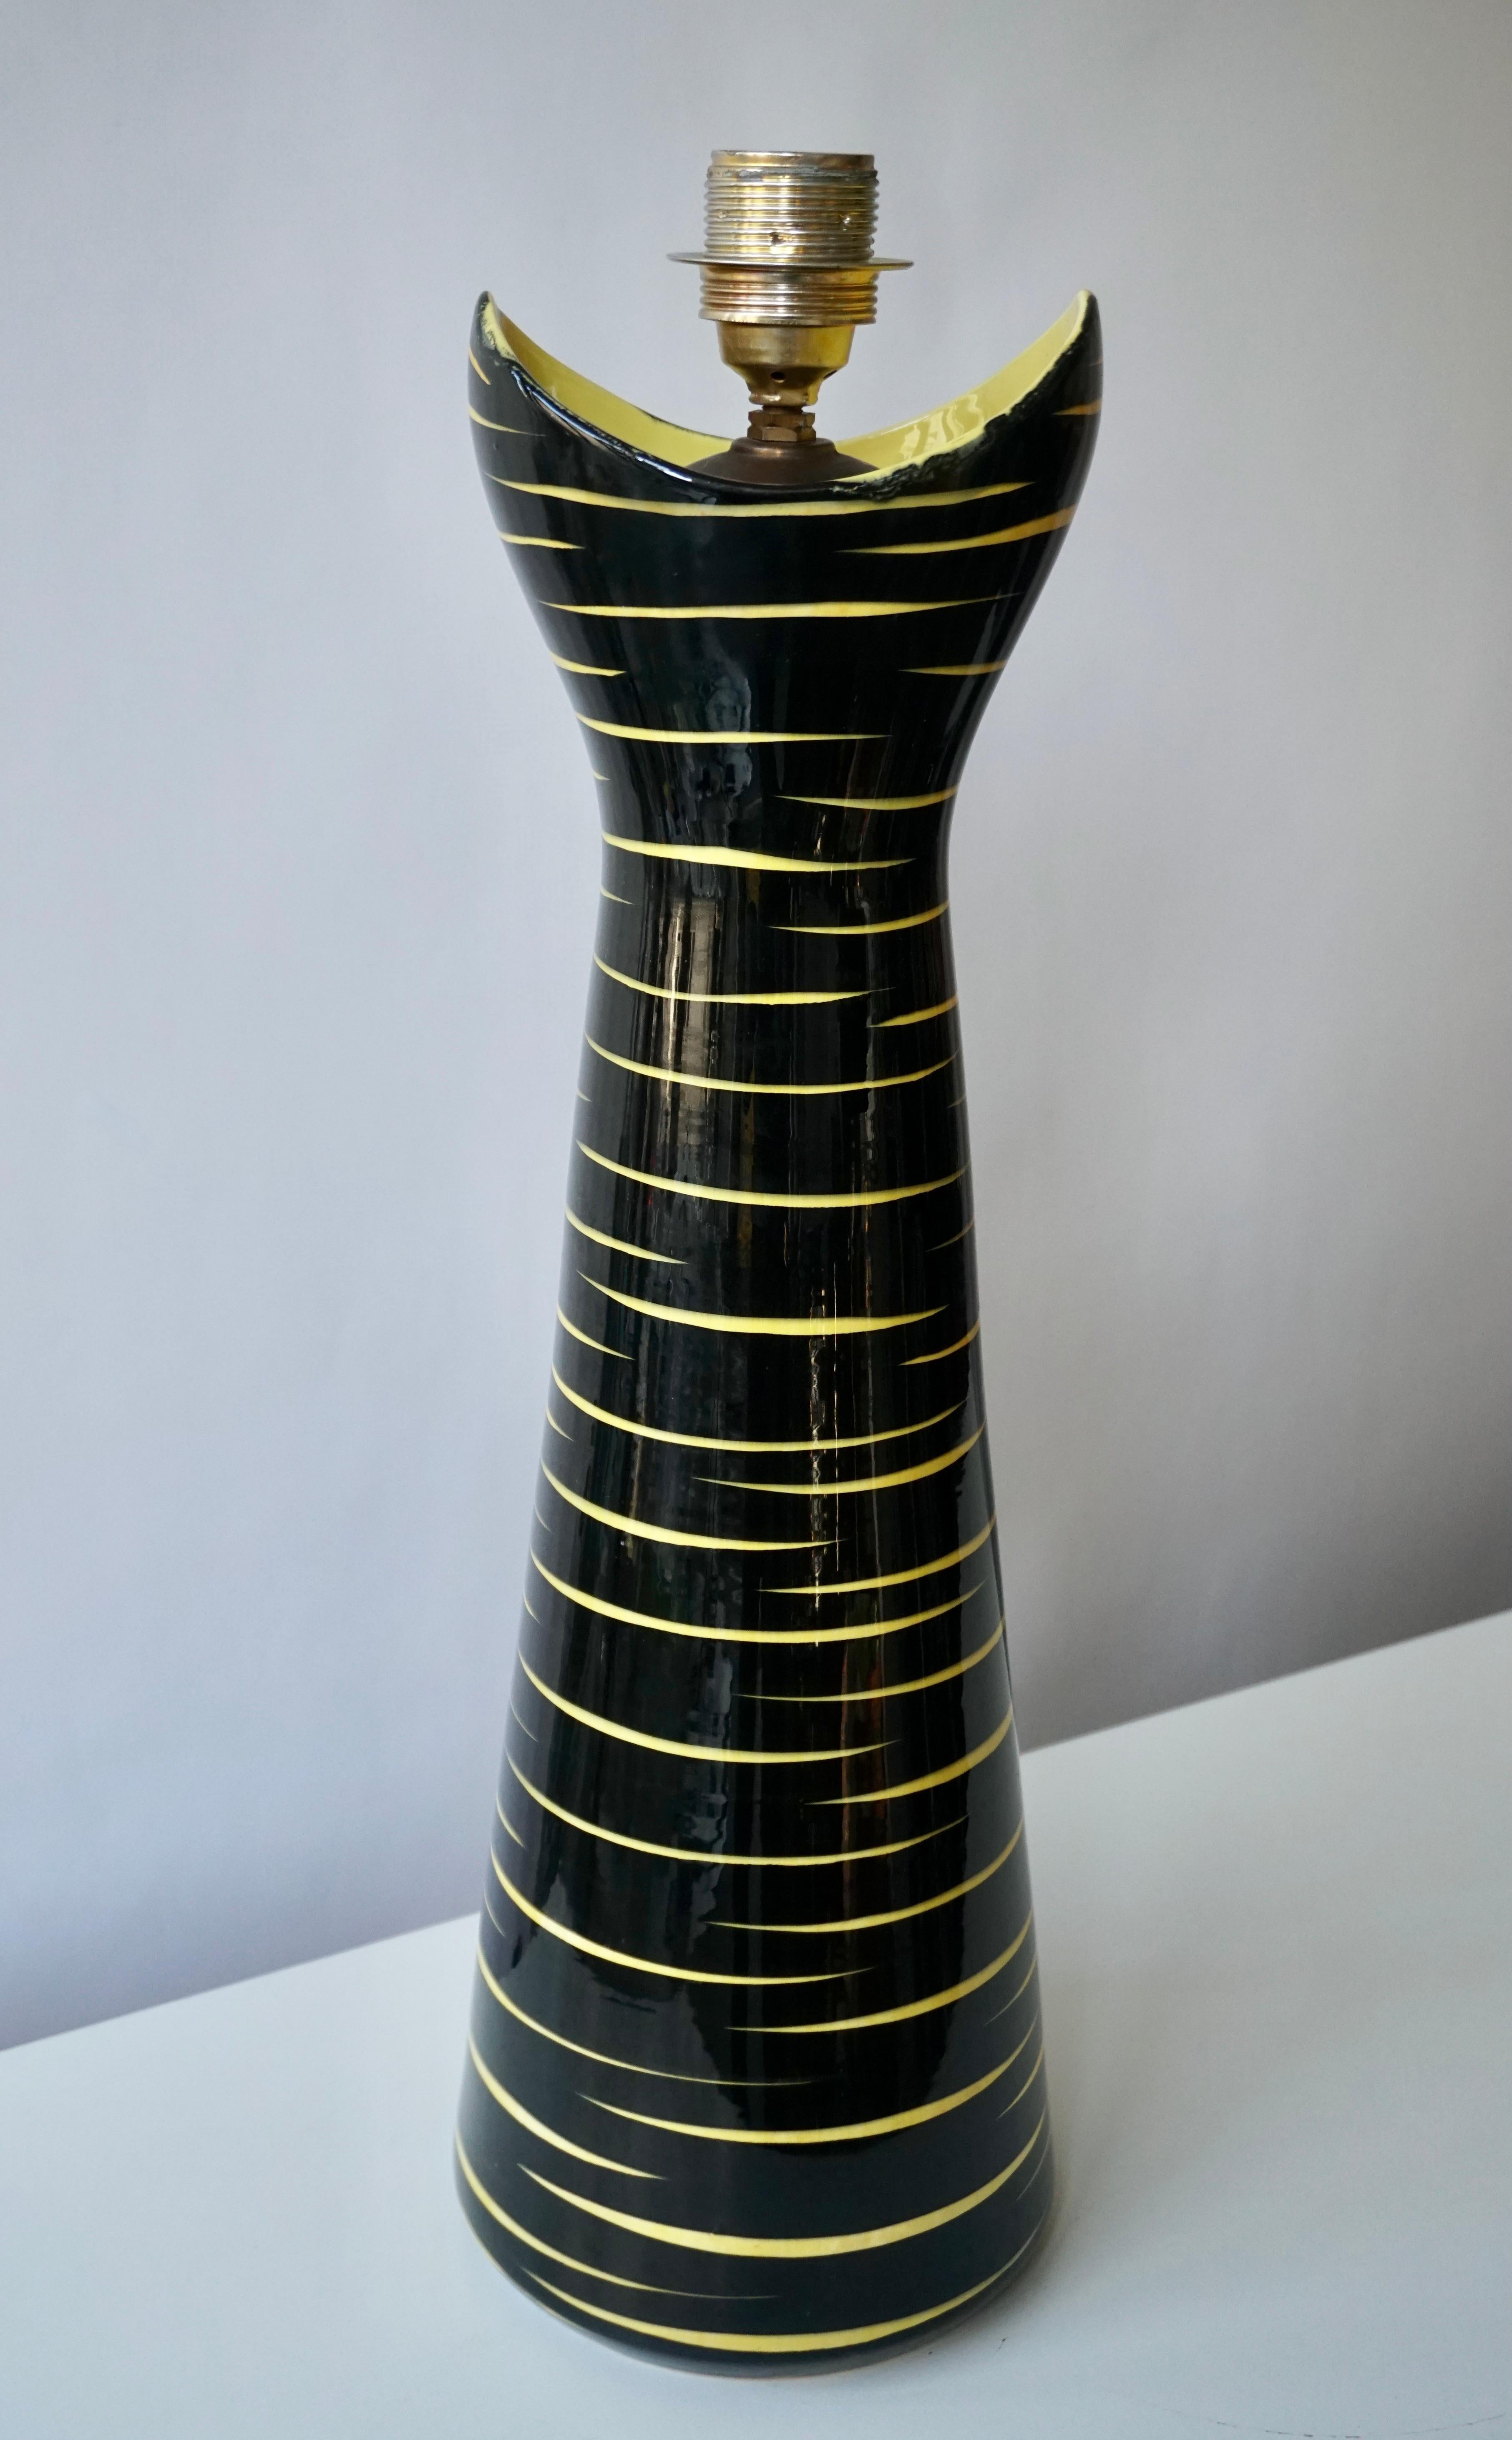 German Mid-Century Modern Black and Yellow Ceramic Table Lamp, 1950s For Sale